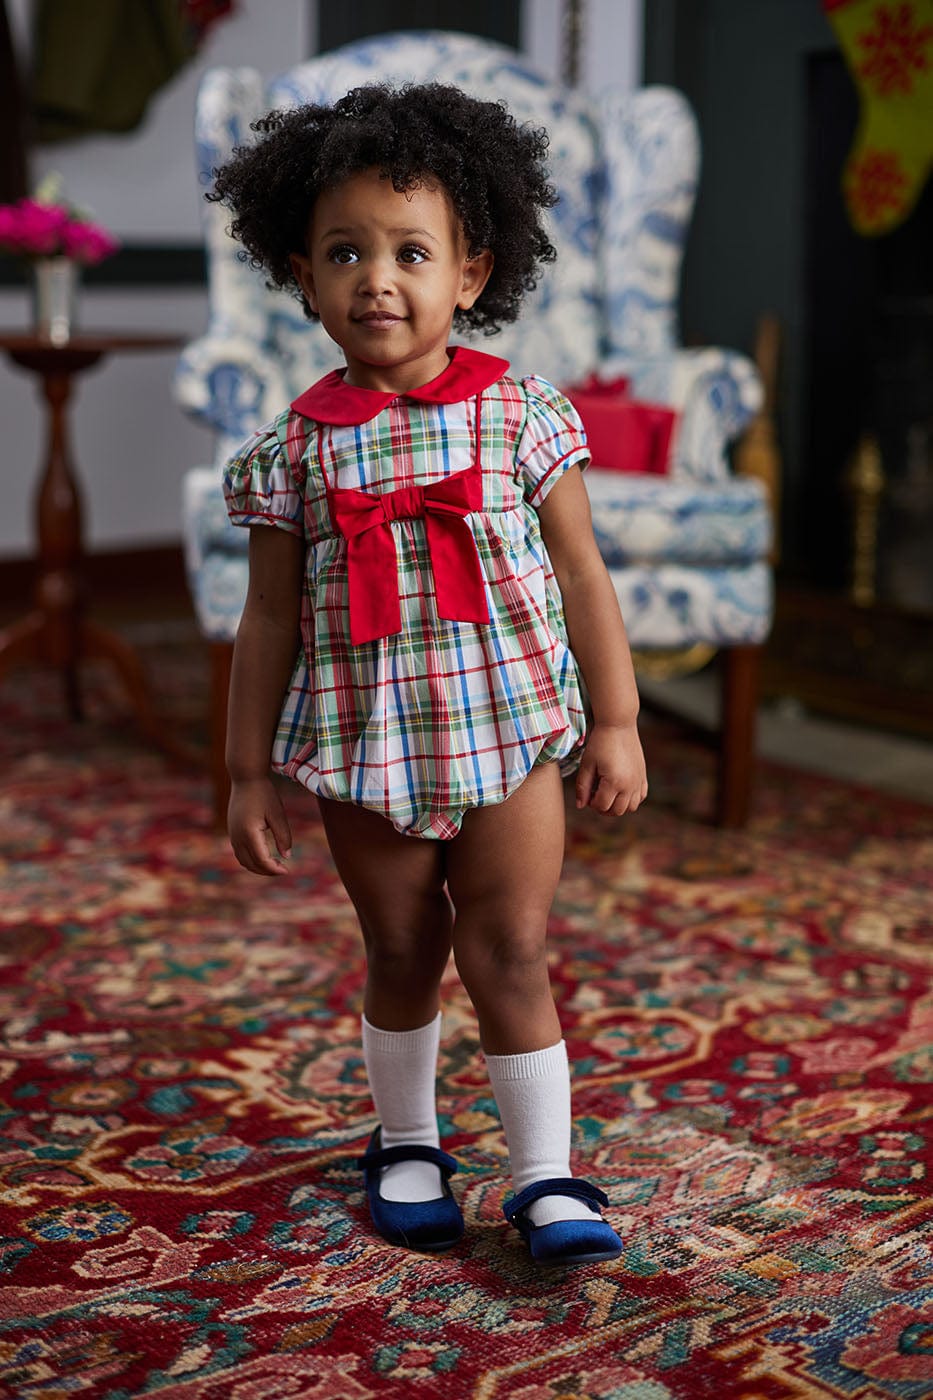 classic baby girl clothes girls bubble in green and red plaid with red piping and peter pan collar and red bow 